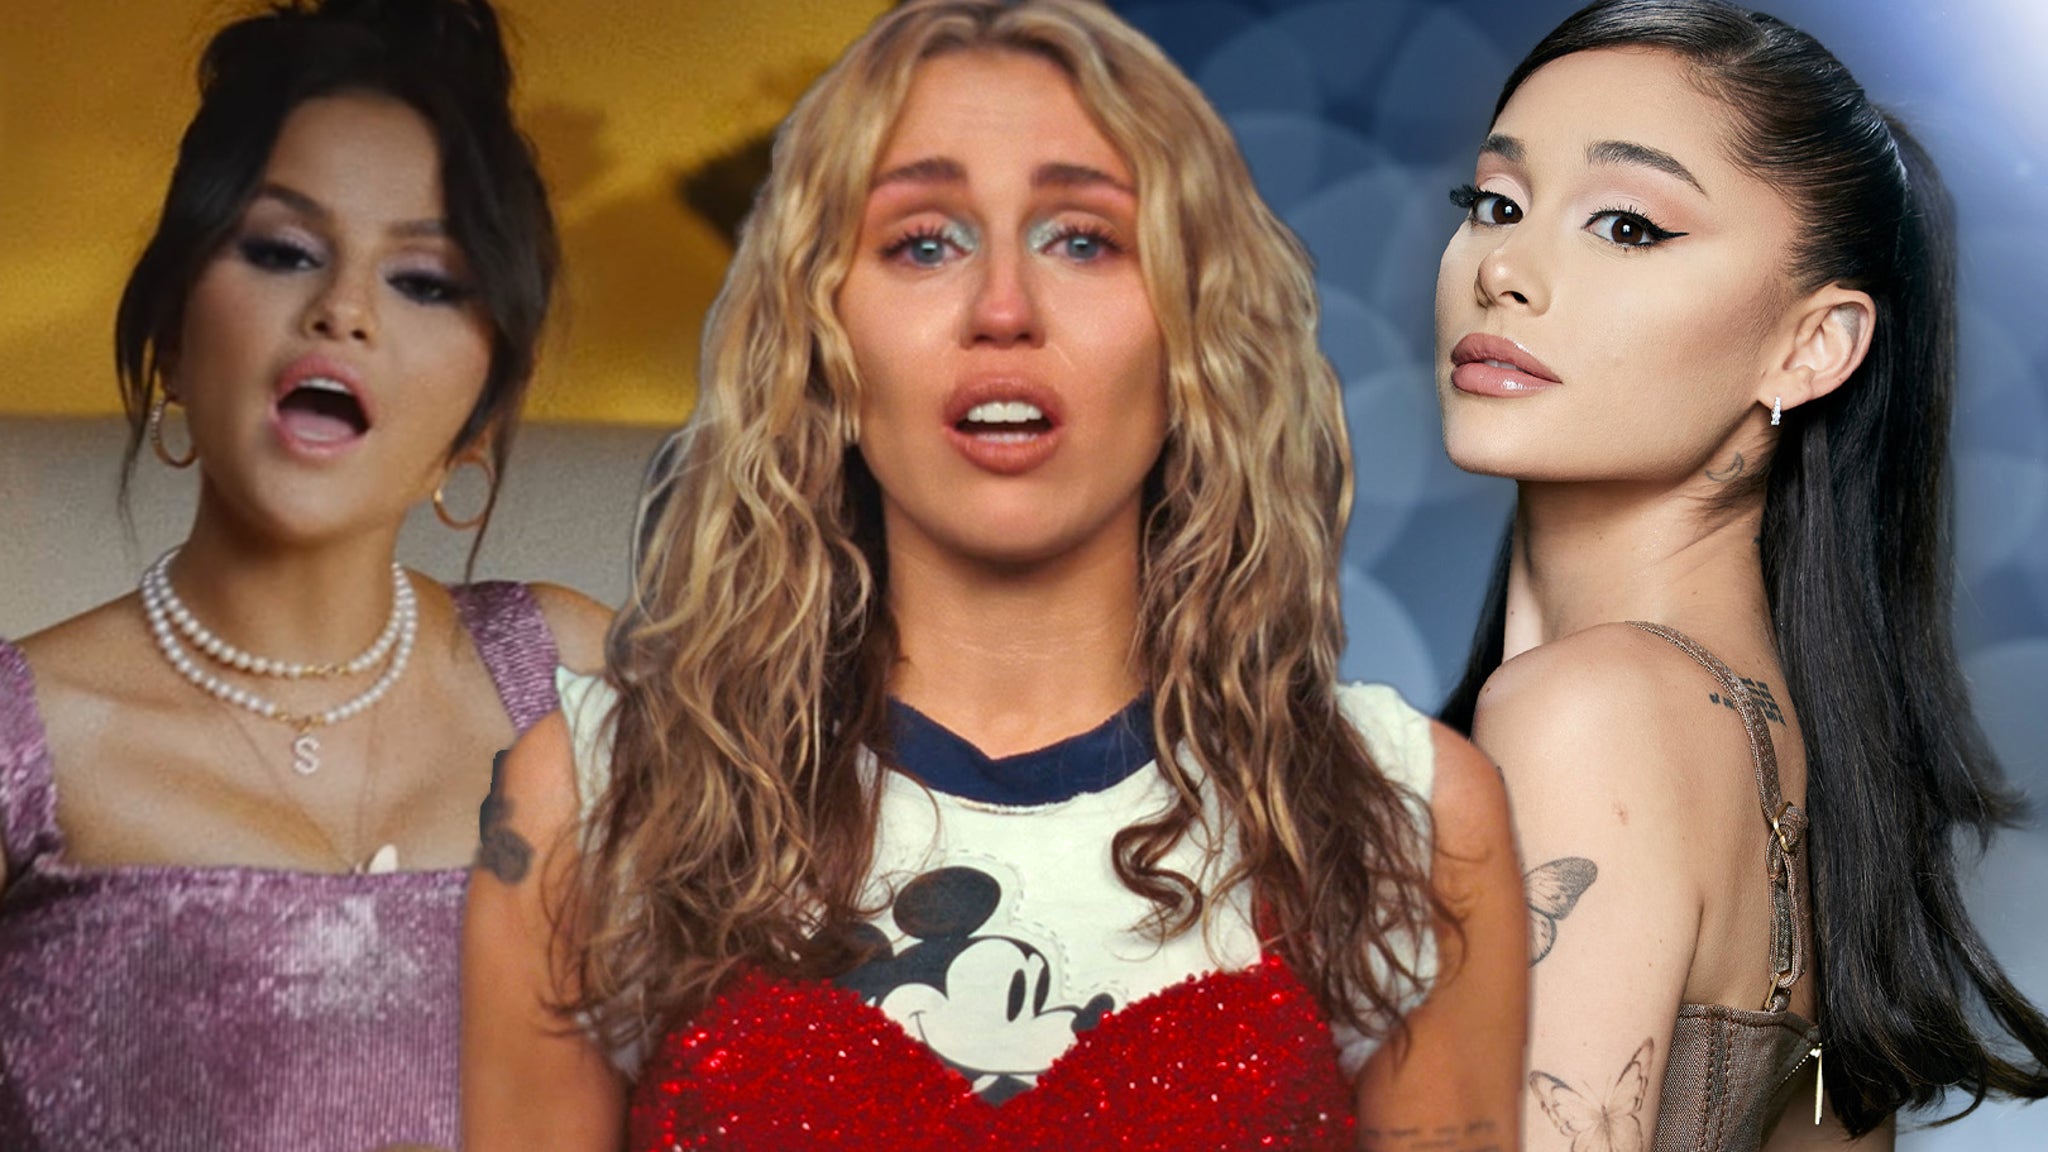 Miley Cyrus, Selena Gomez, Ariana Grande All Release Music — Watch New Videos Now!